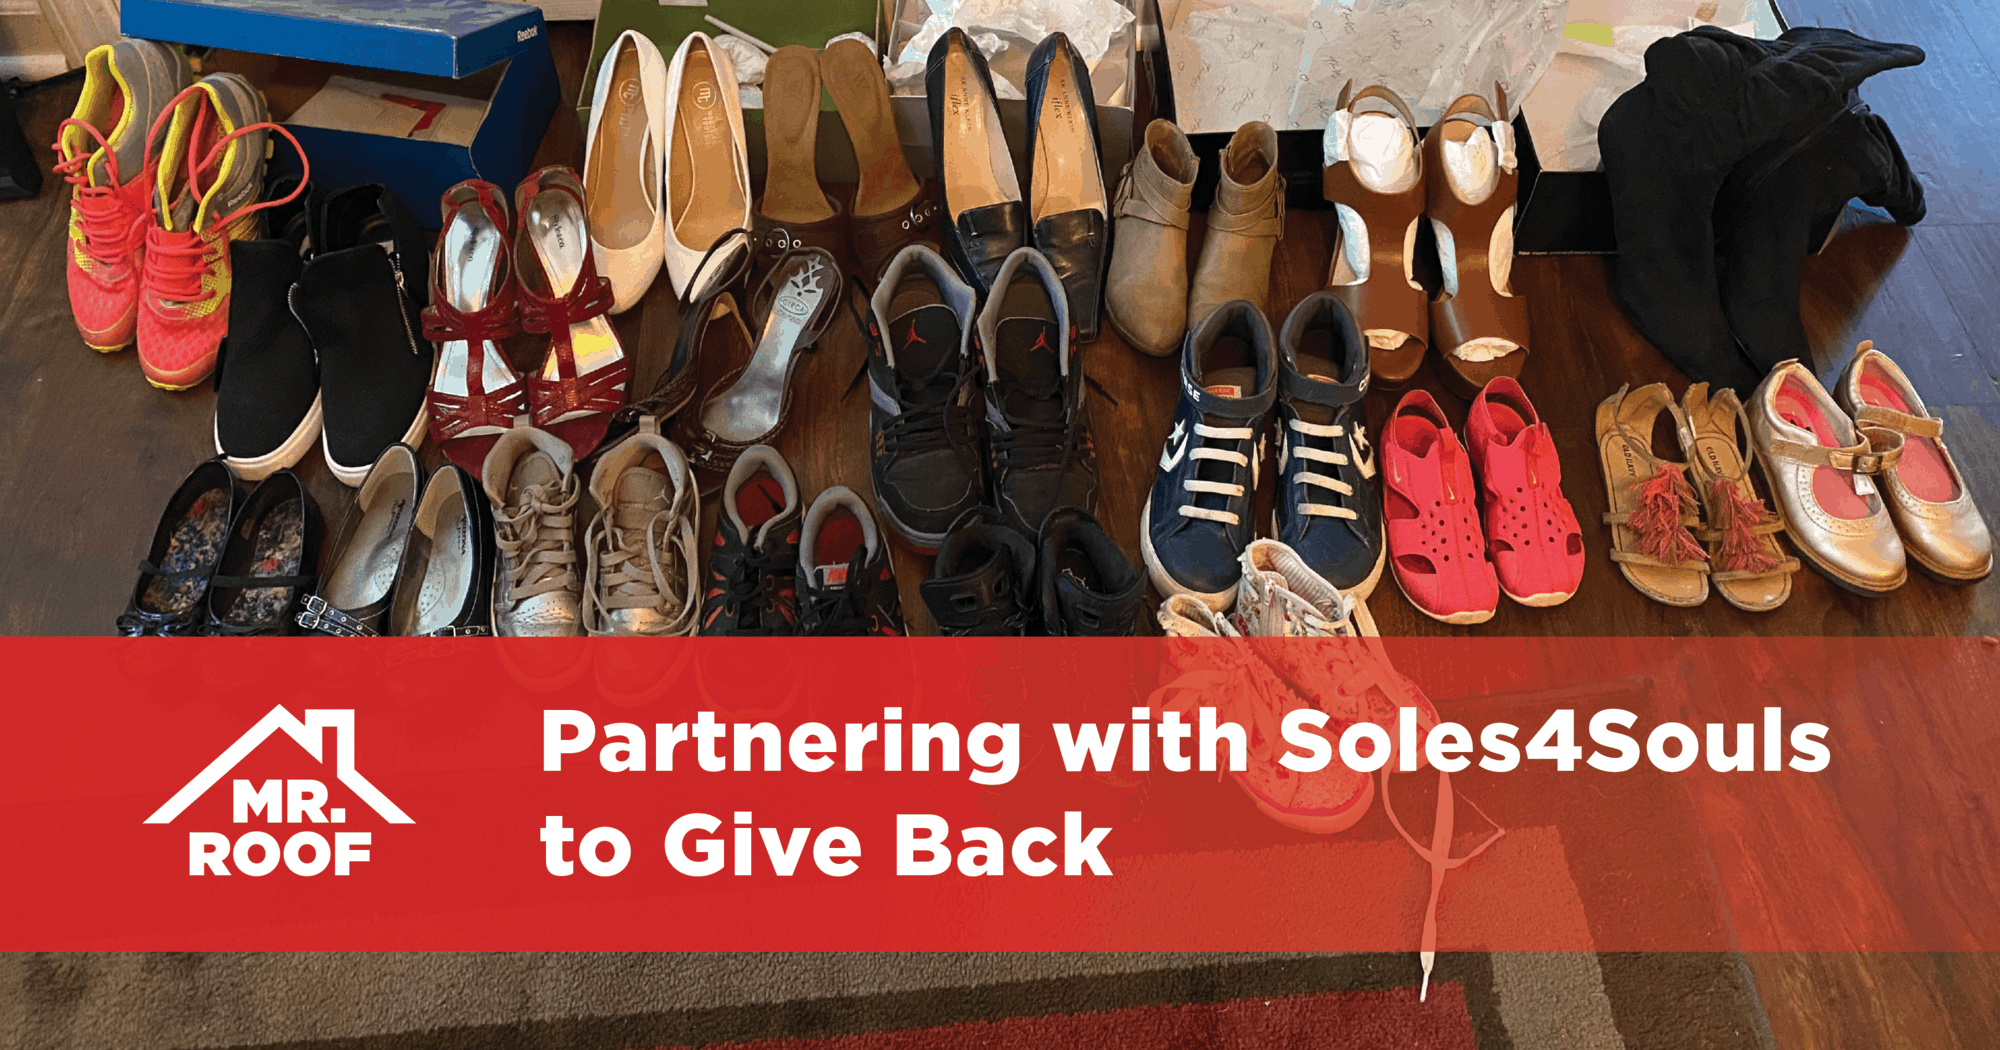 Partnering with Soles4Souls to Give Back